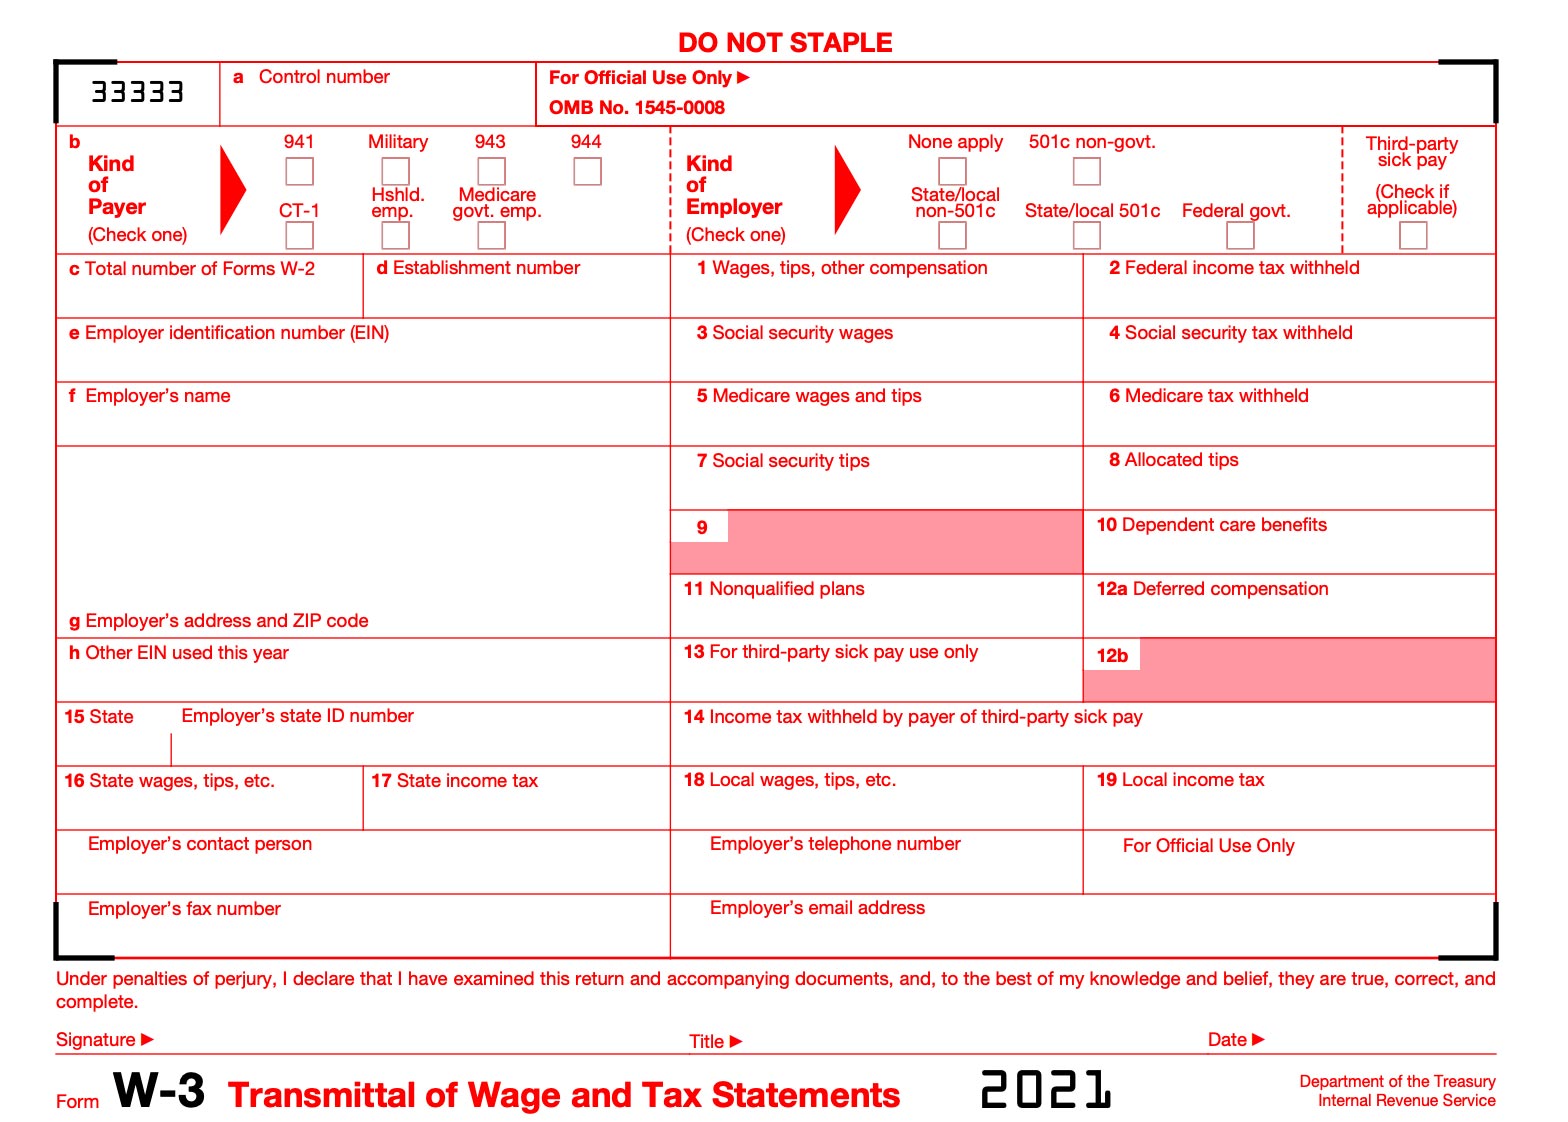 Example of an IRS W-3 Form